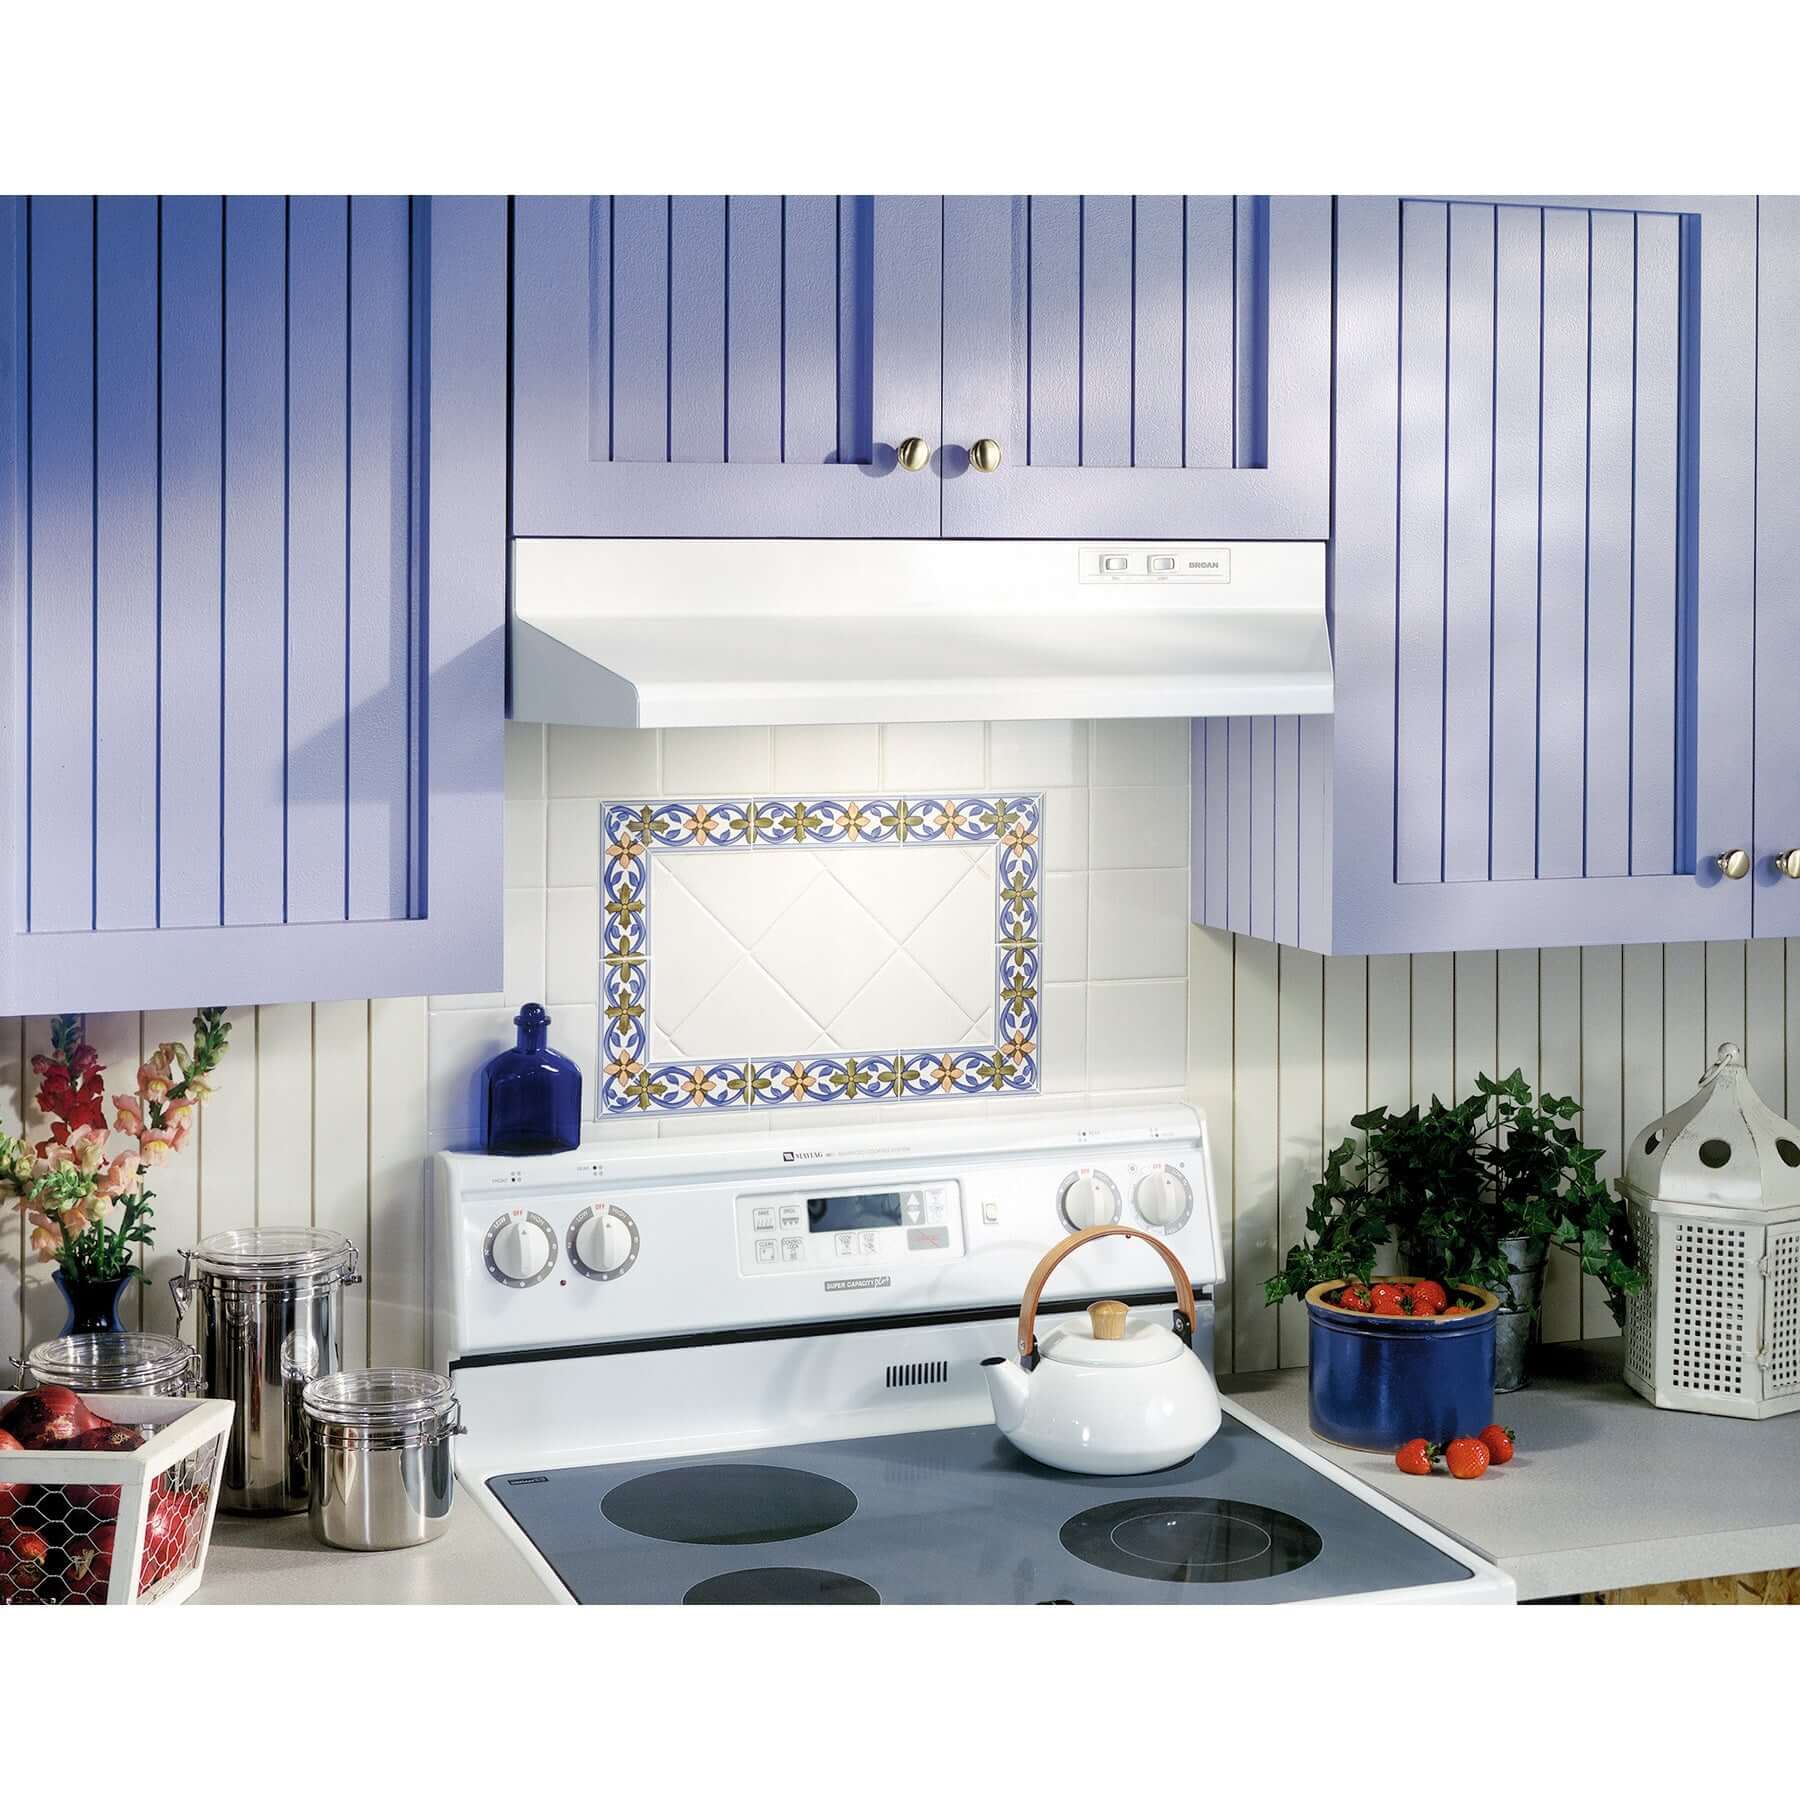 Broan-NuTone, LLC 40000 Series 30-In. Under-Cabinet Range Hood with Light in Monochromatic White (403001)